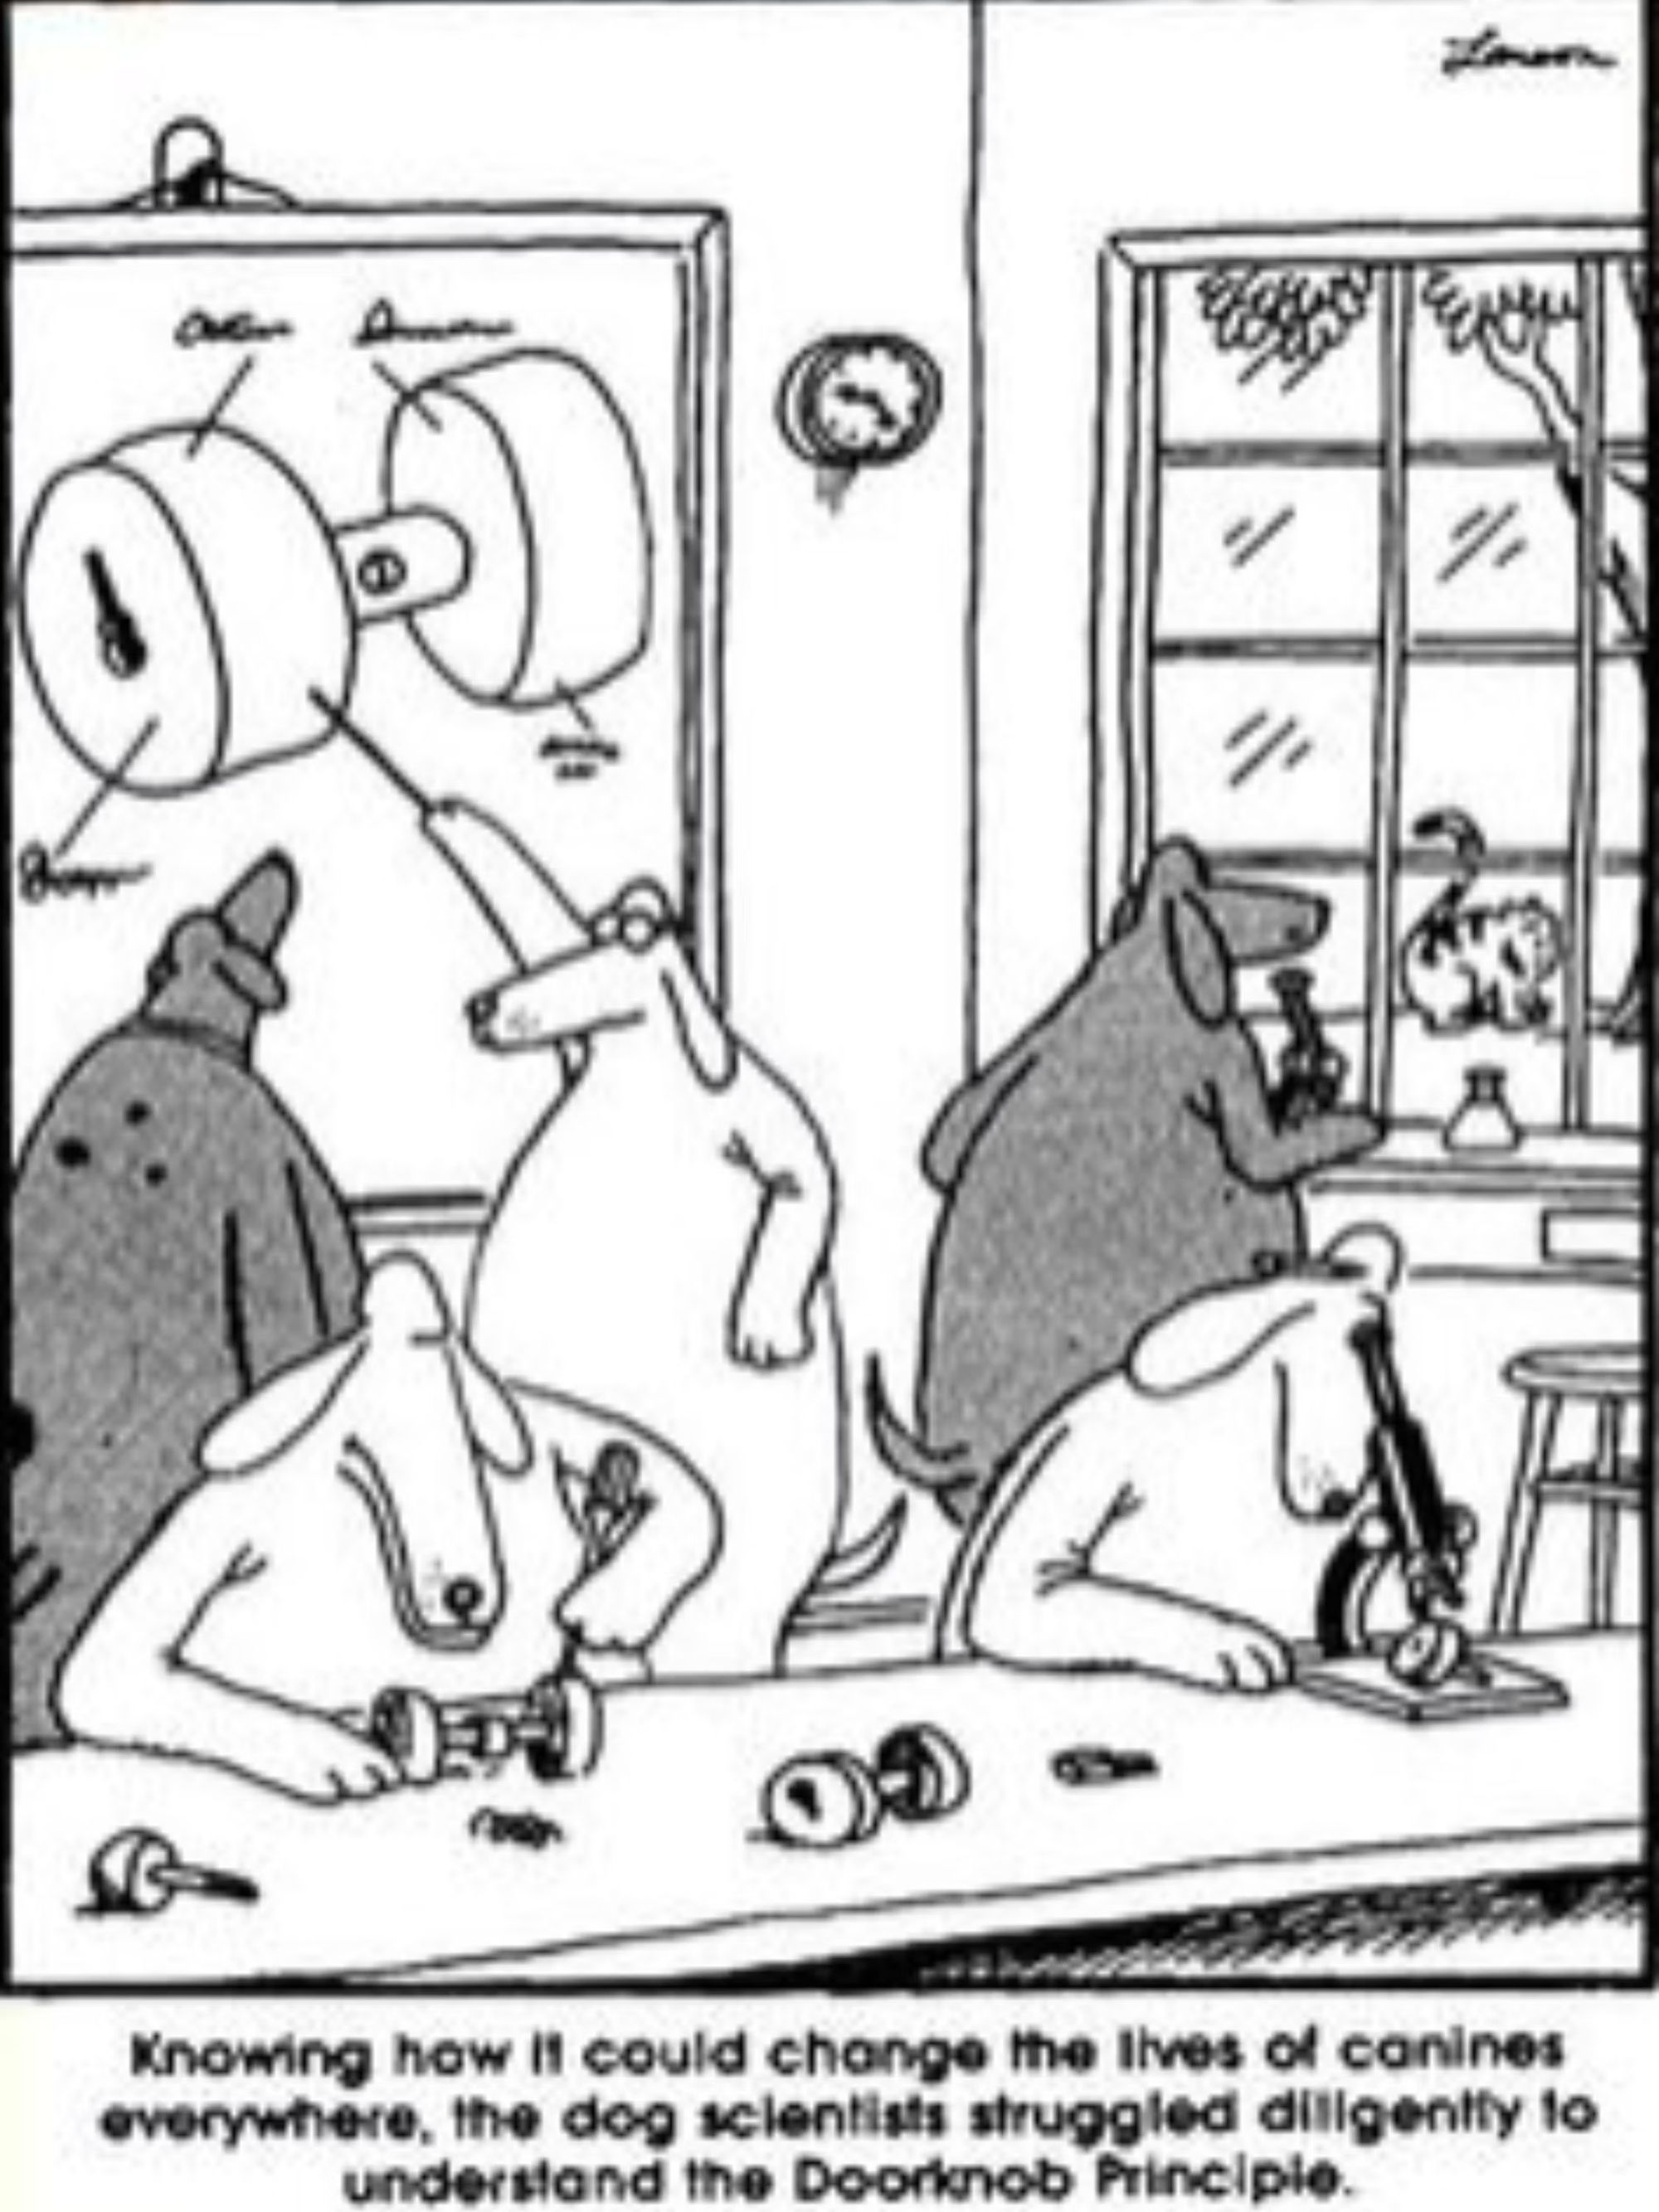 Far Side: Dog scientists struggle to figure out 